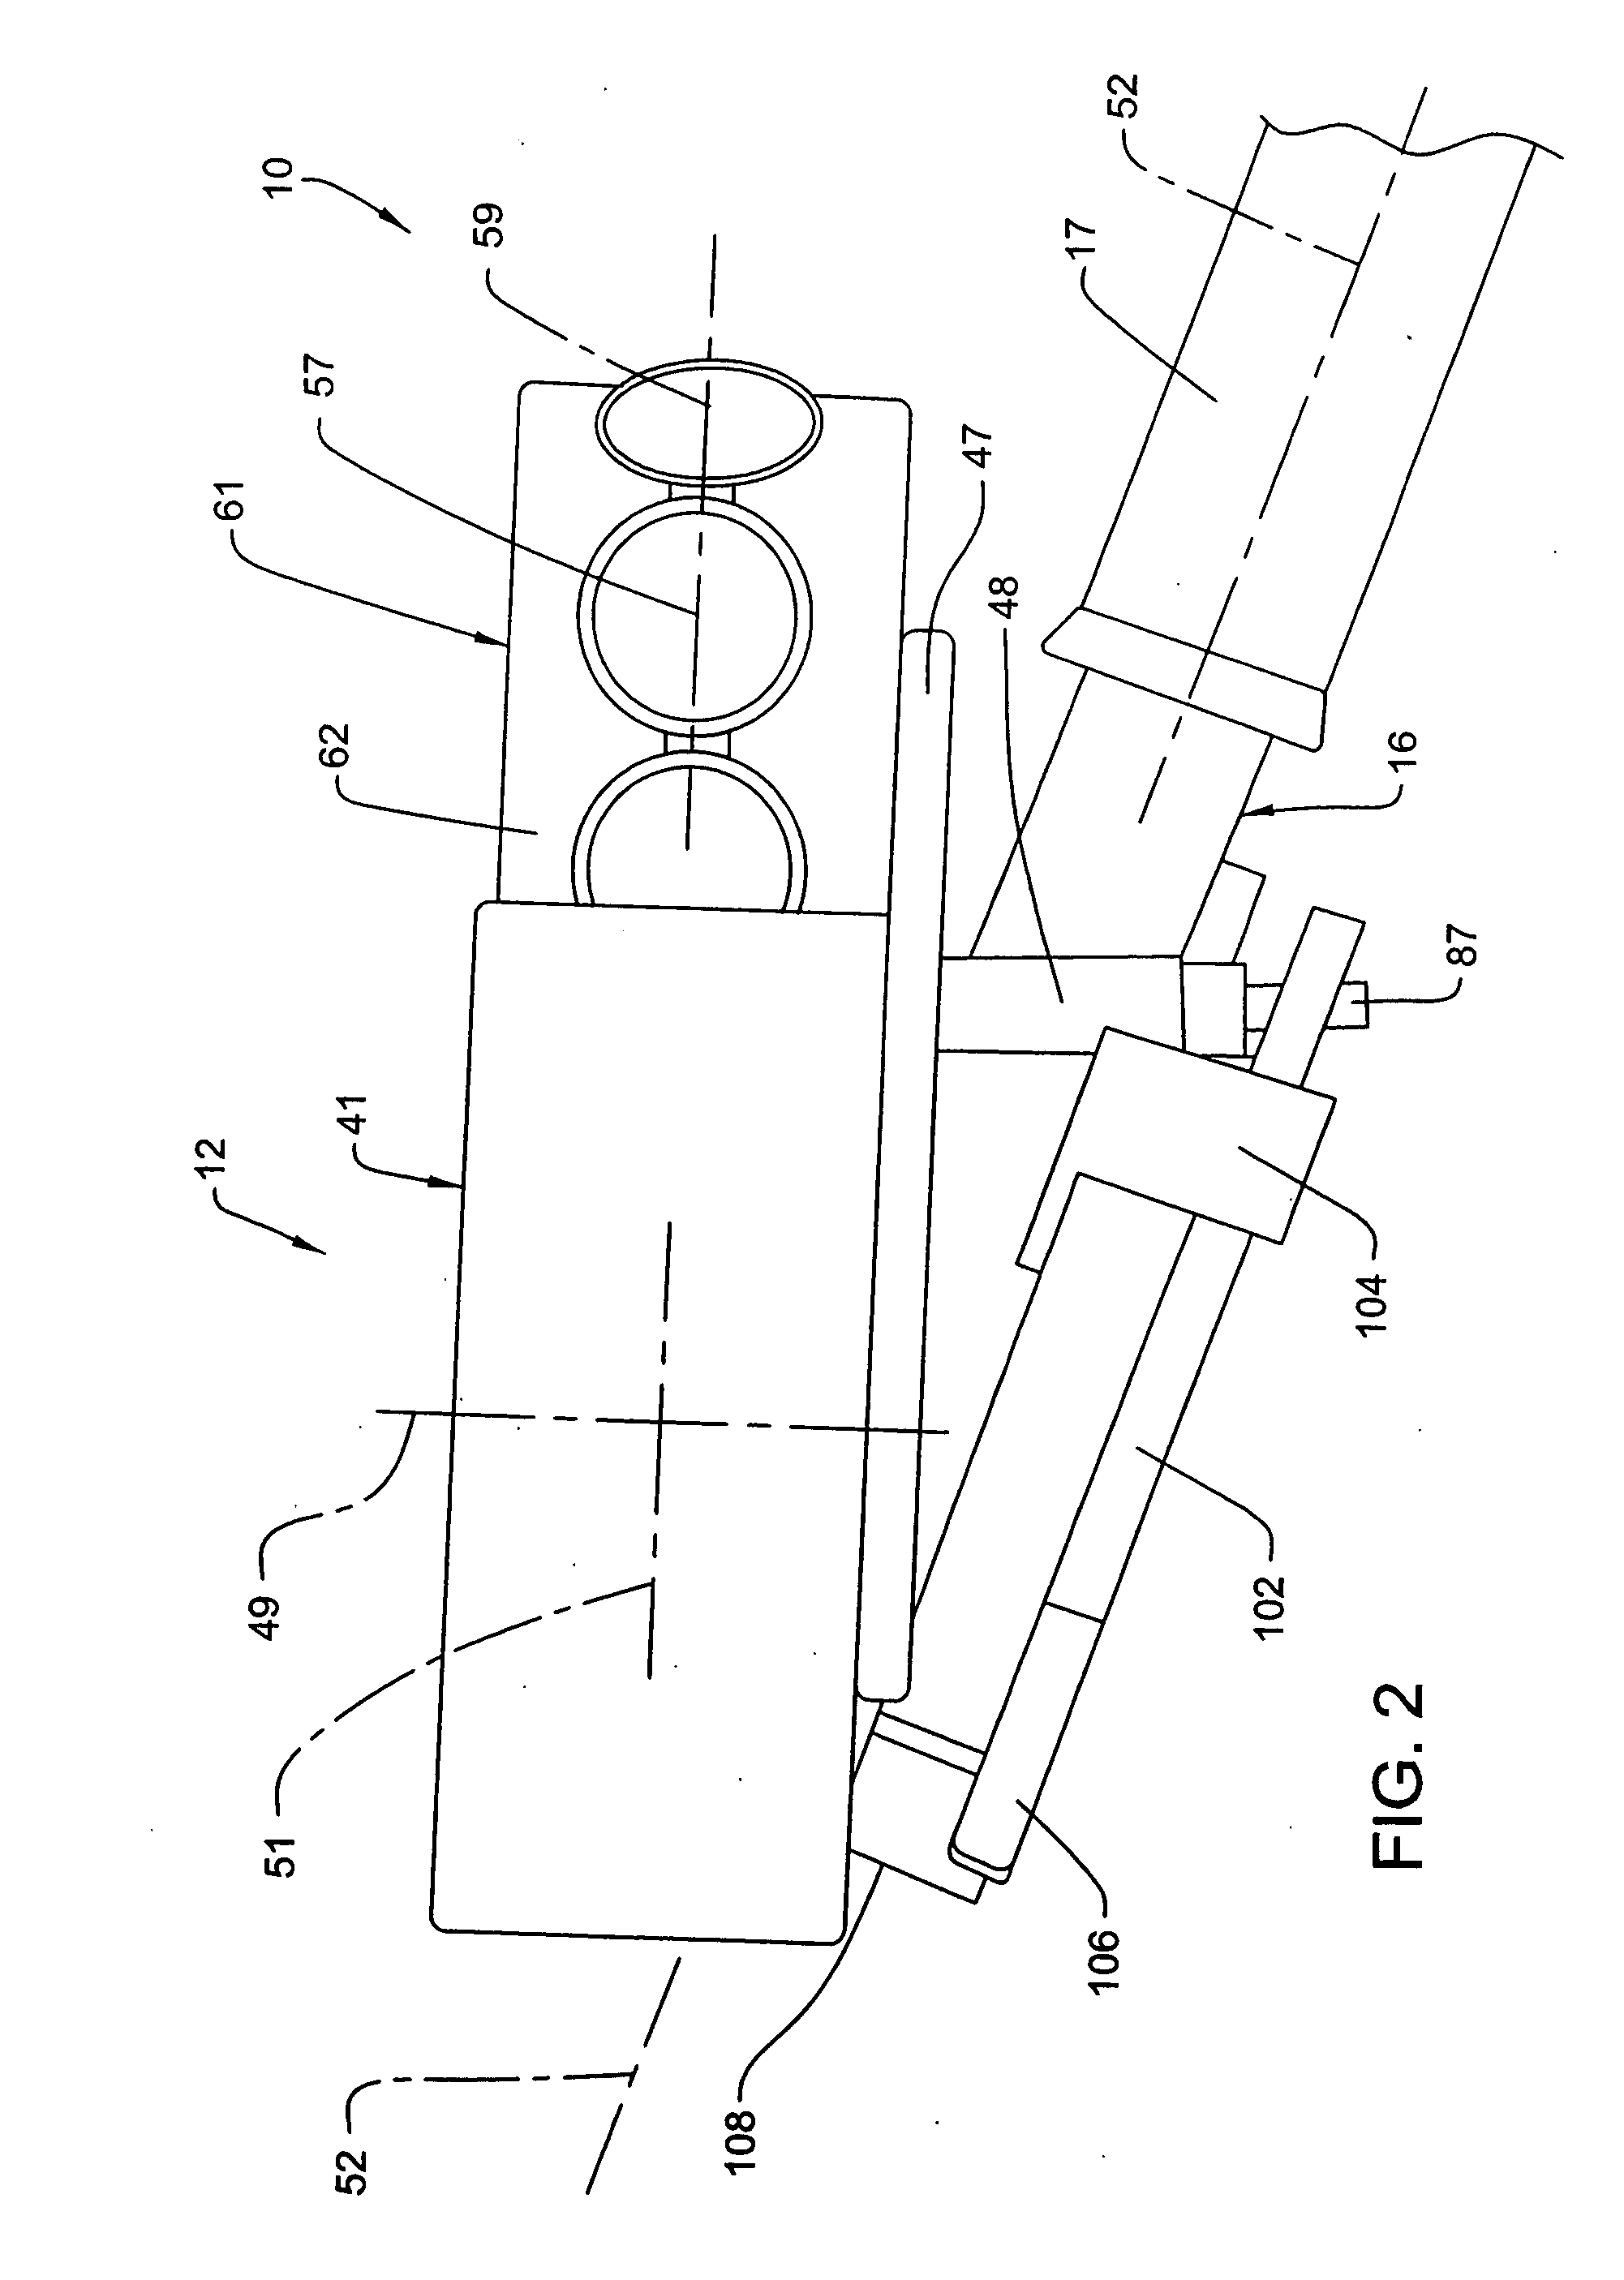 Impact fastener tool with cap feed